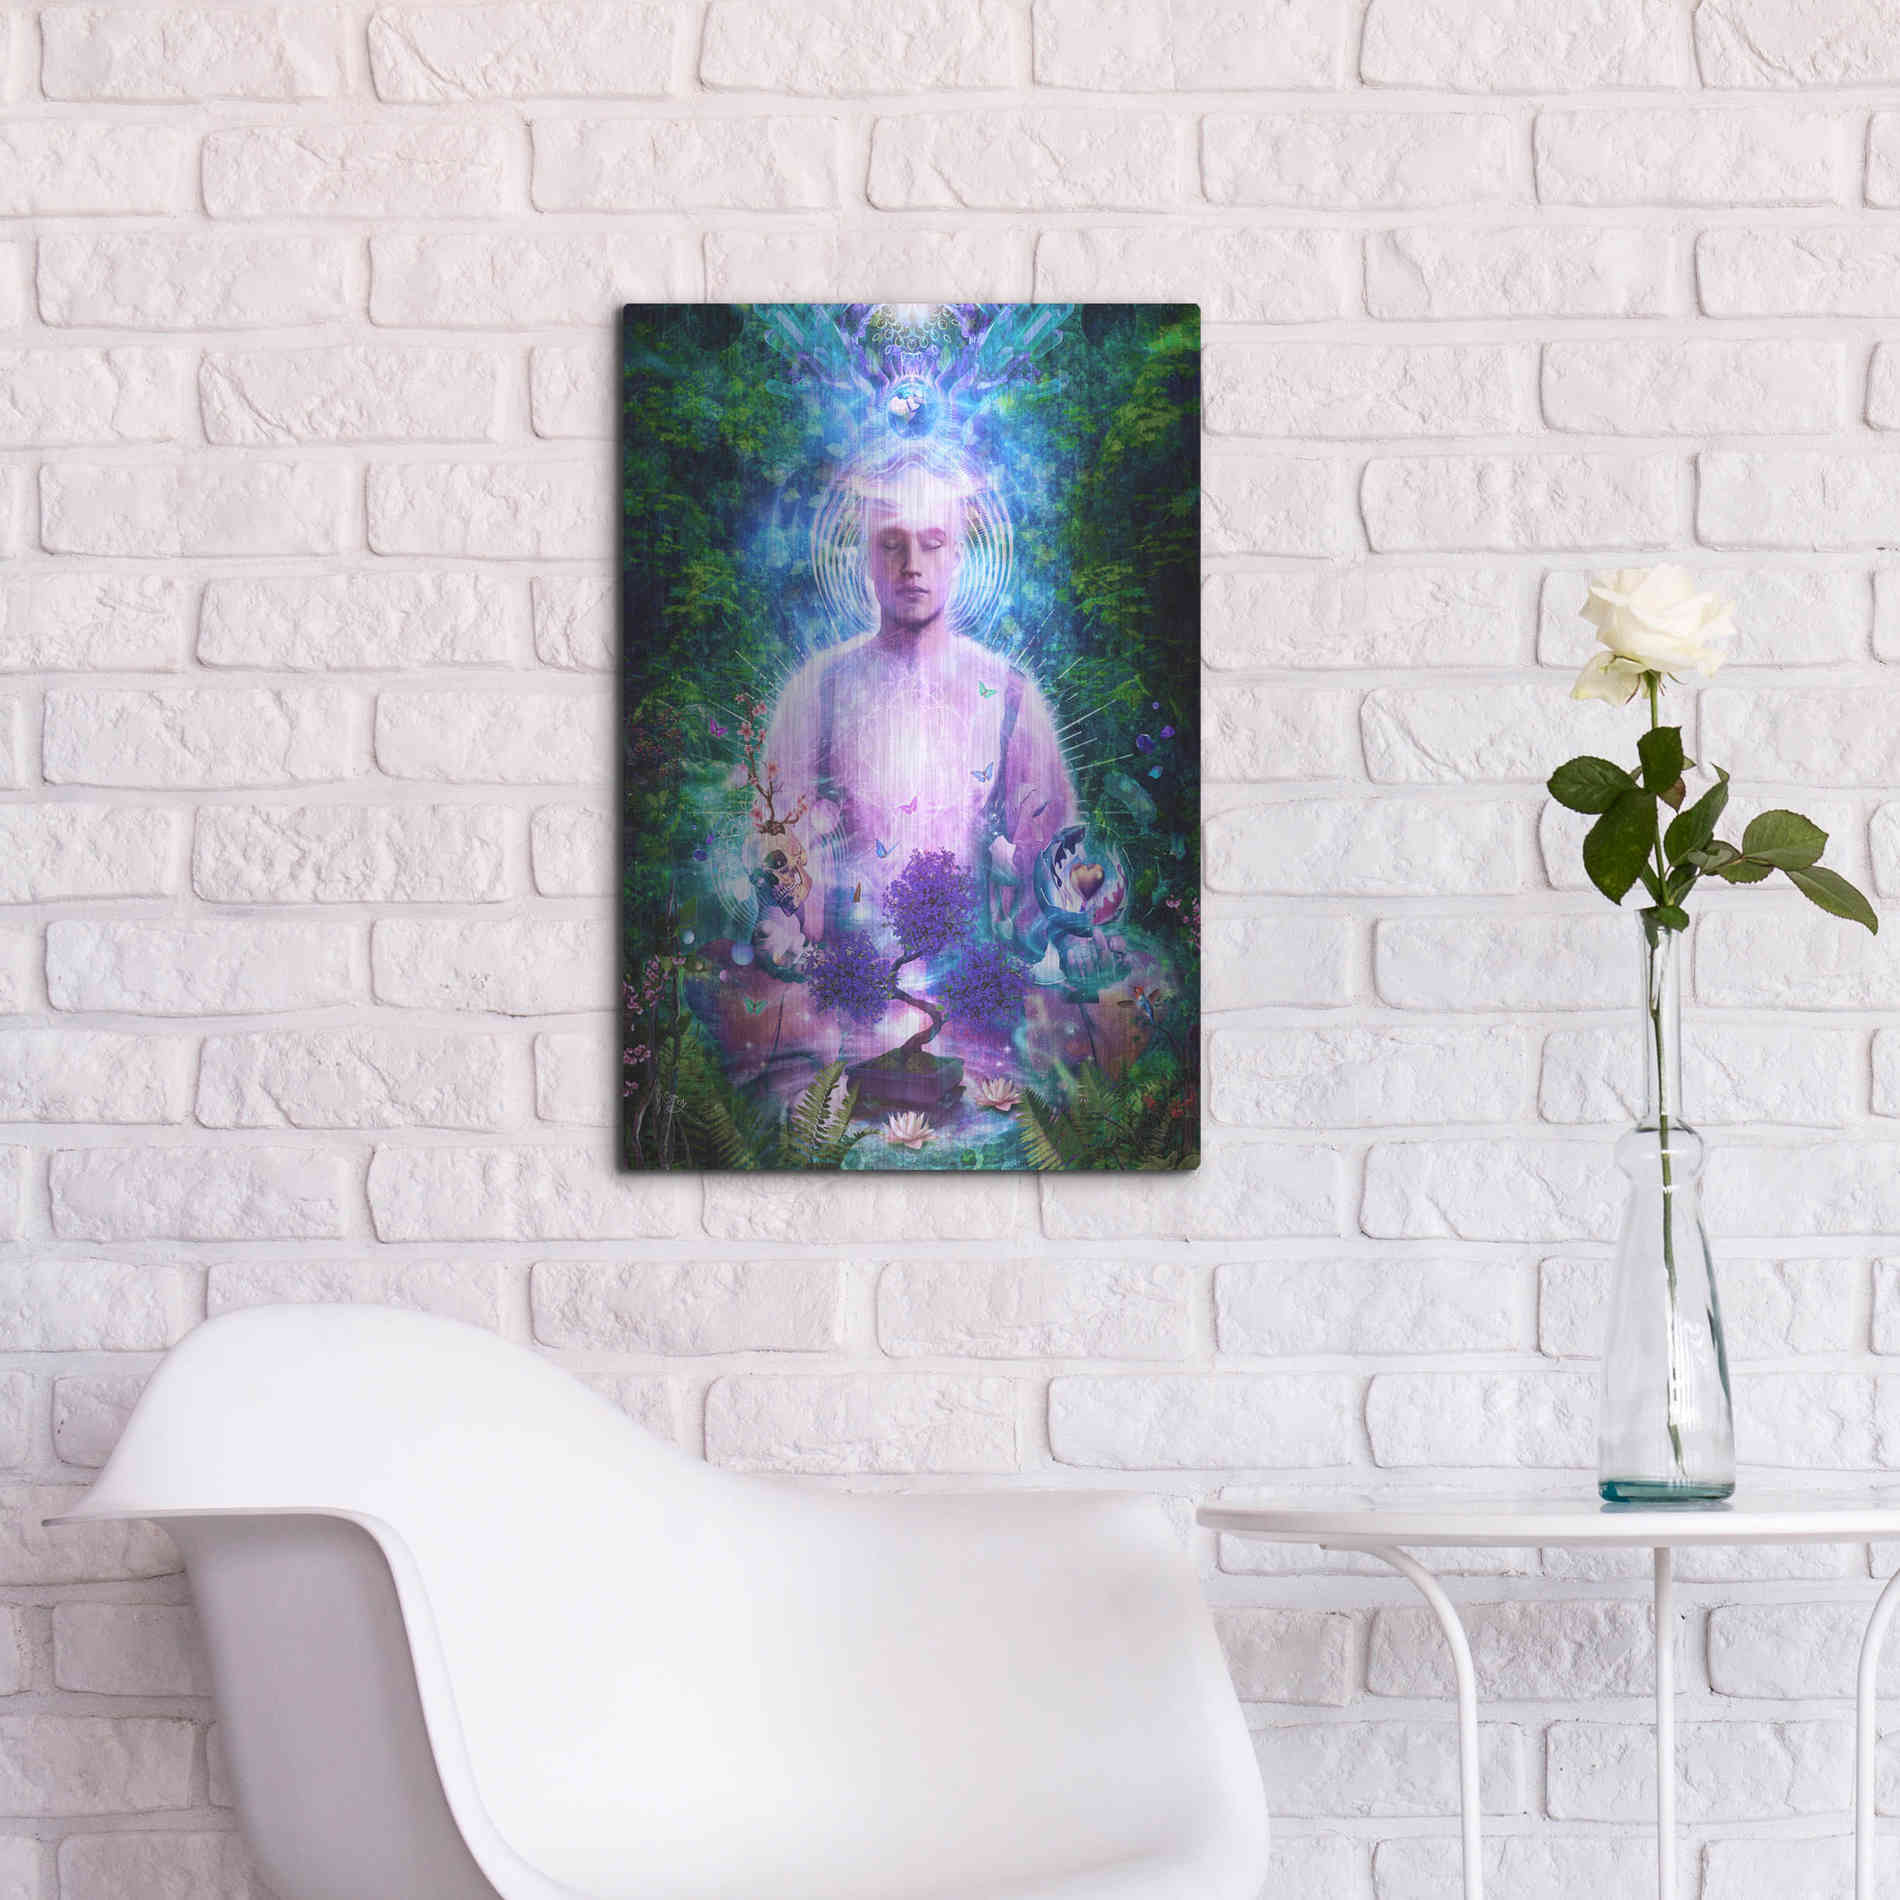 Luxe Metal Art 'Daily Meditation' by Cameron Gray Metal Wall Art,16x24